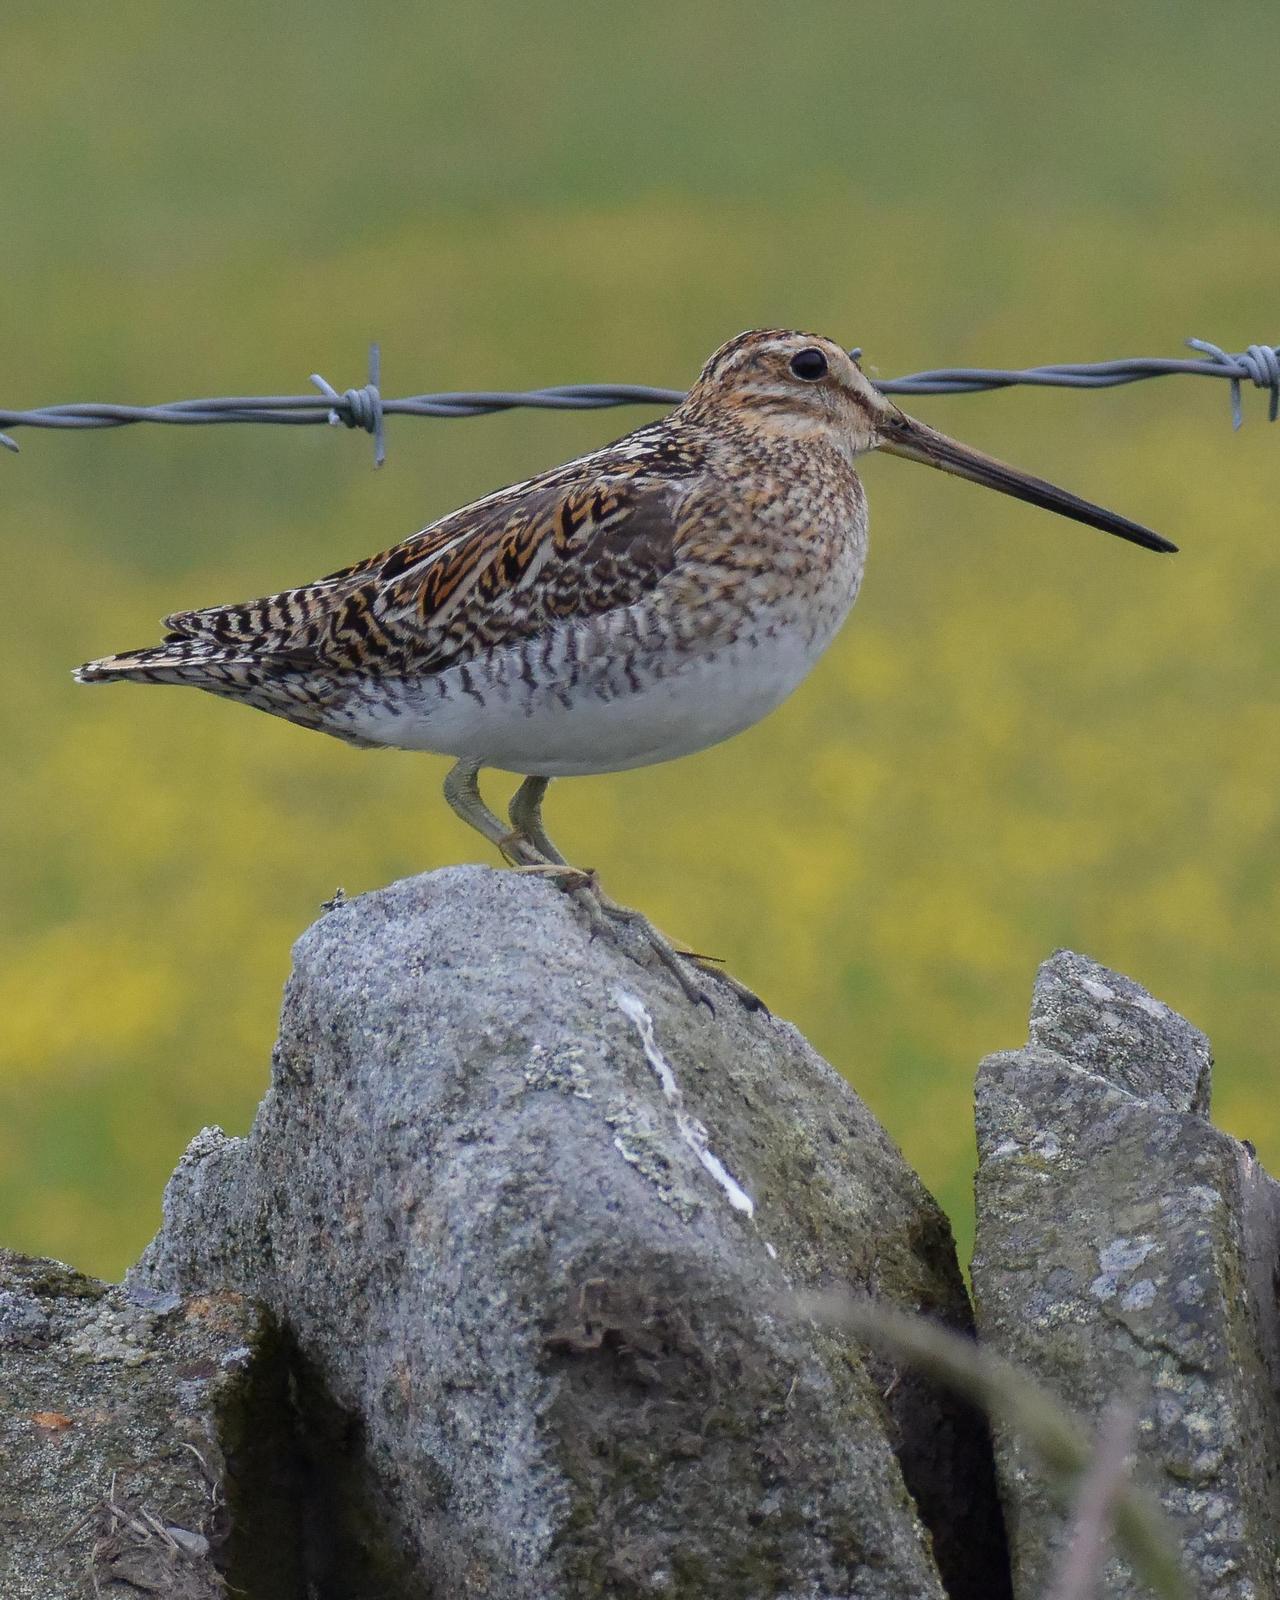 Common Snipe Photo by Emily Percival